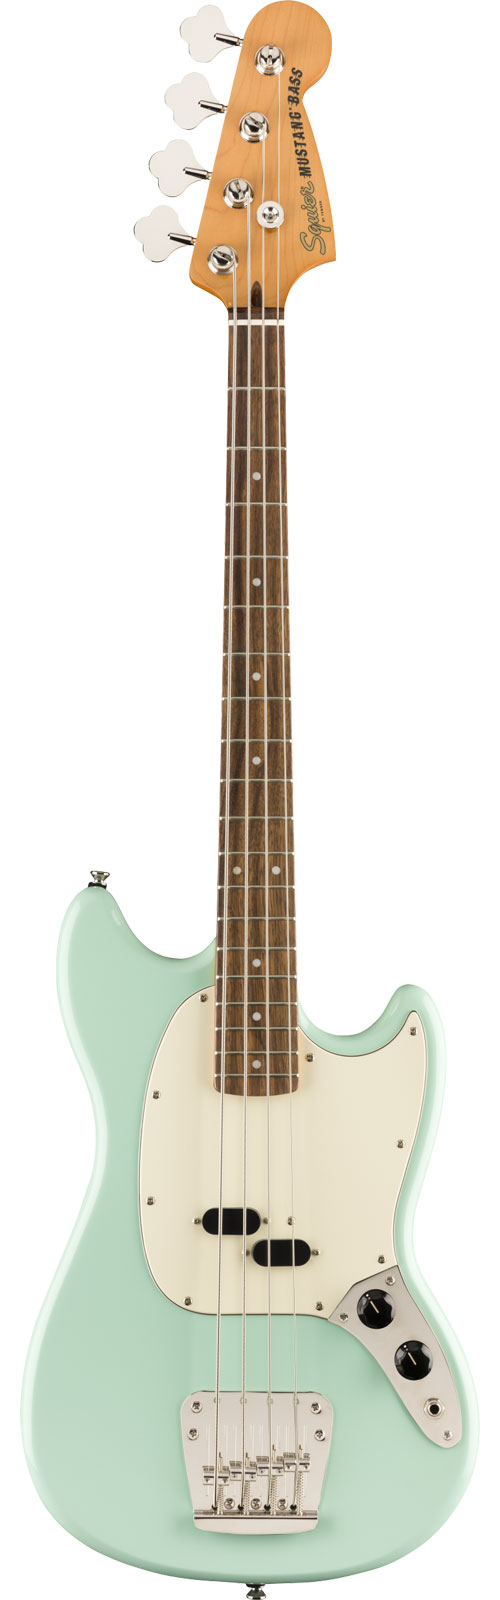 SQUIER CLASSIC VIBE '60S MUSTANG BASS LRL, SURF GREEN